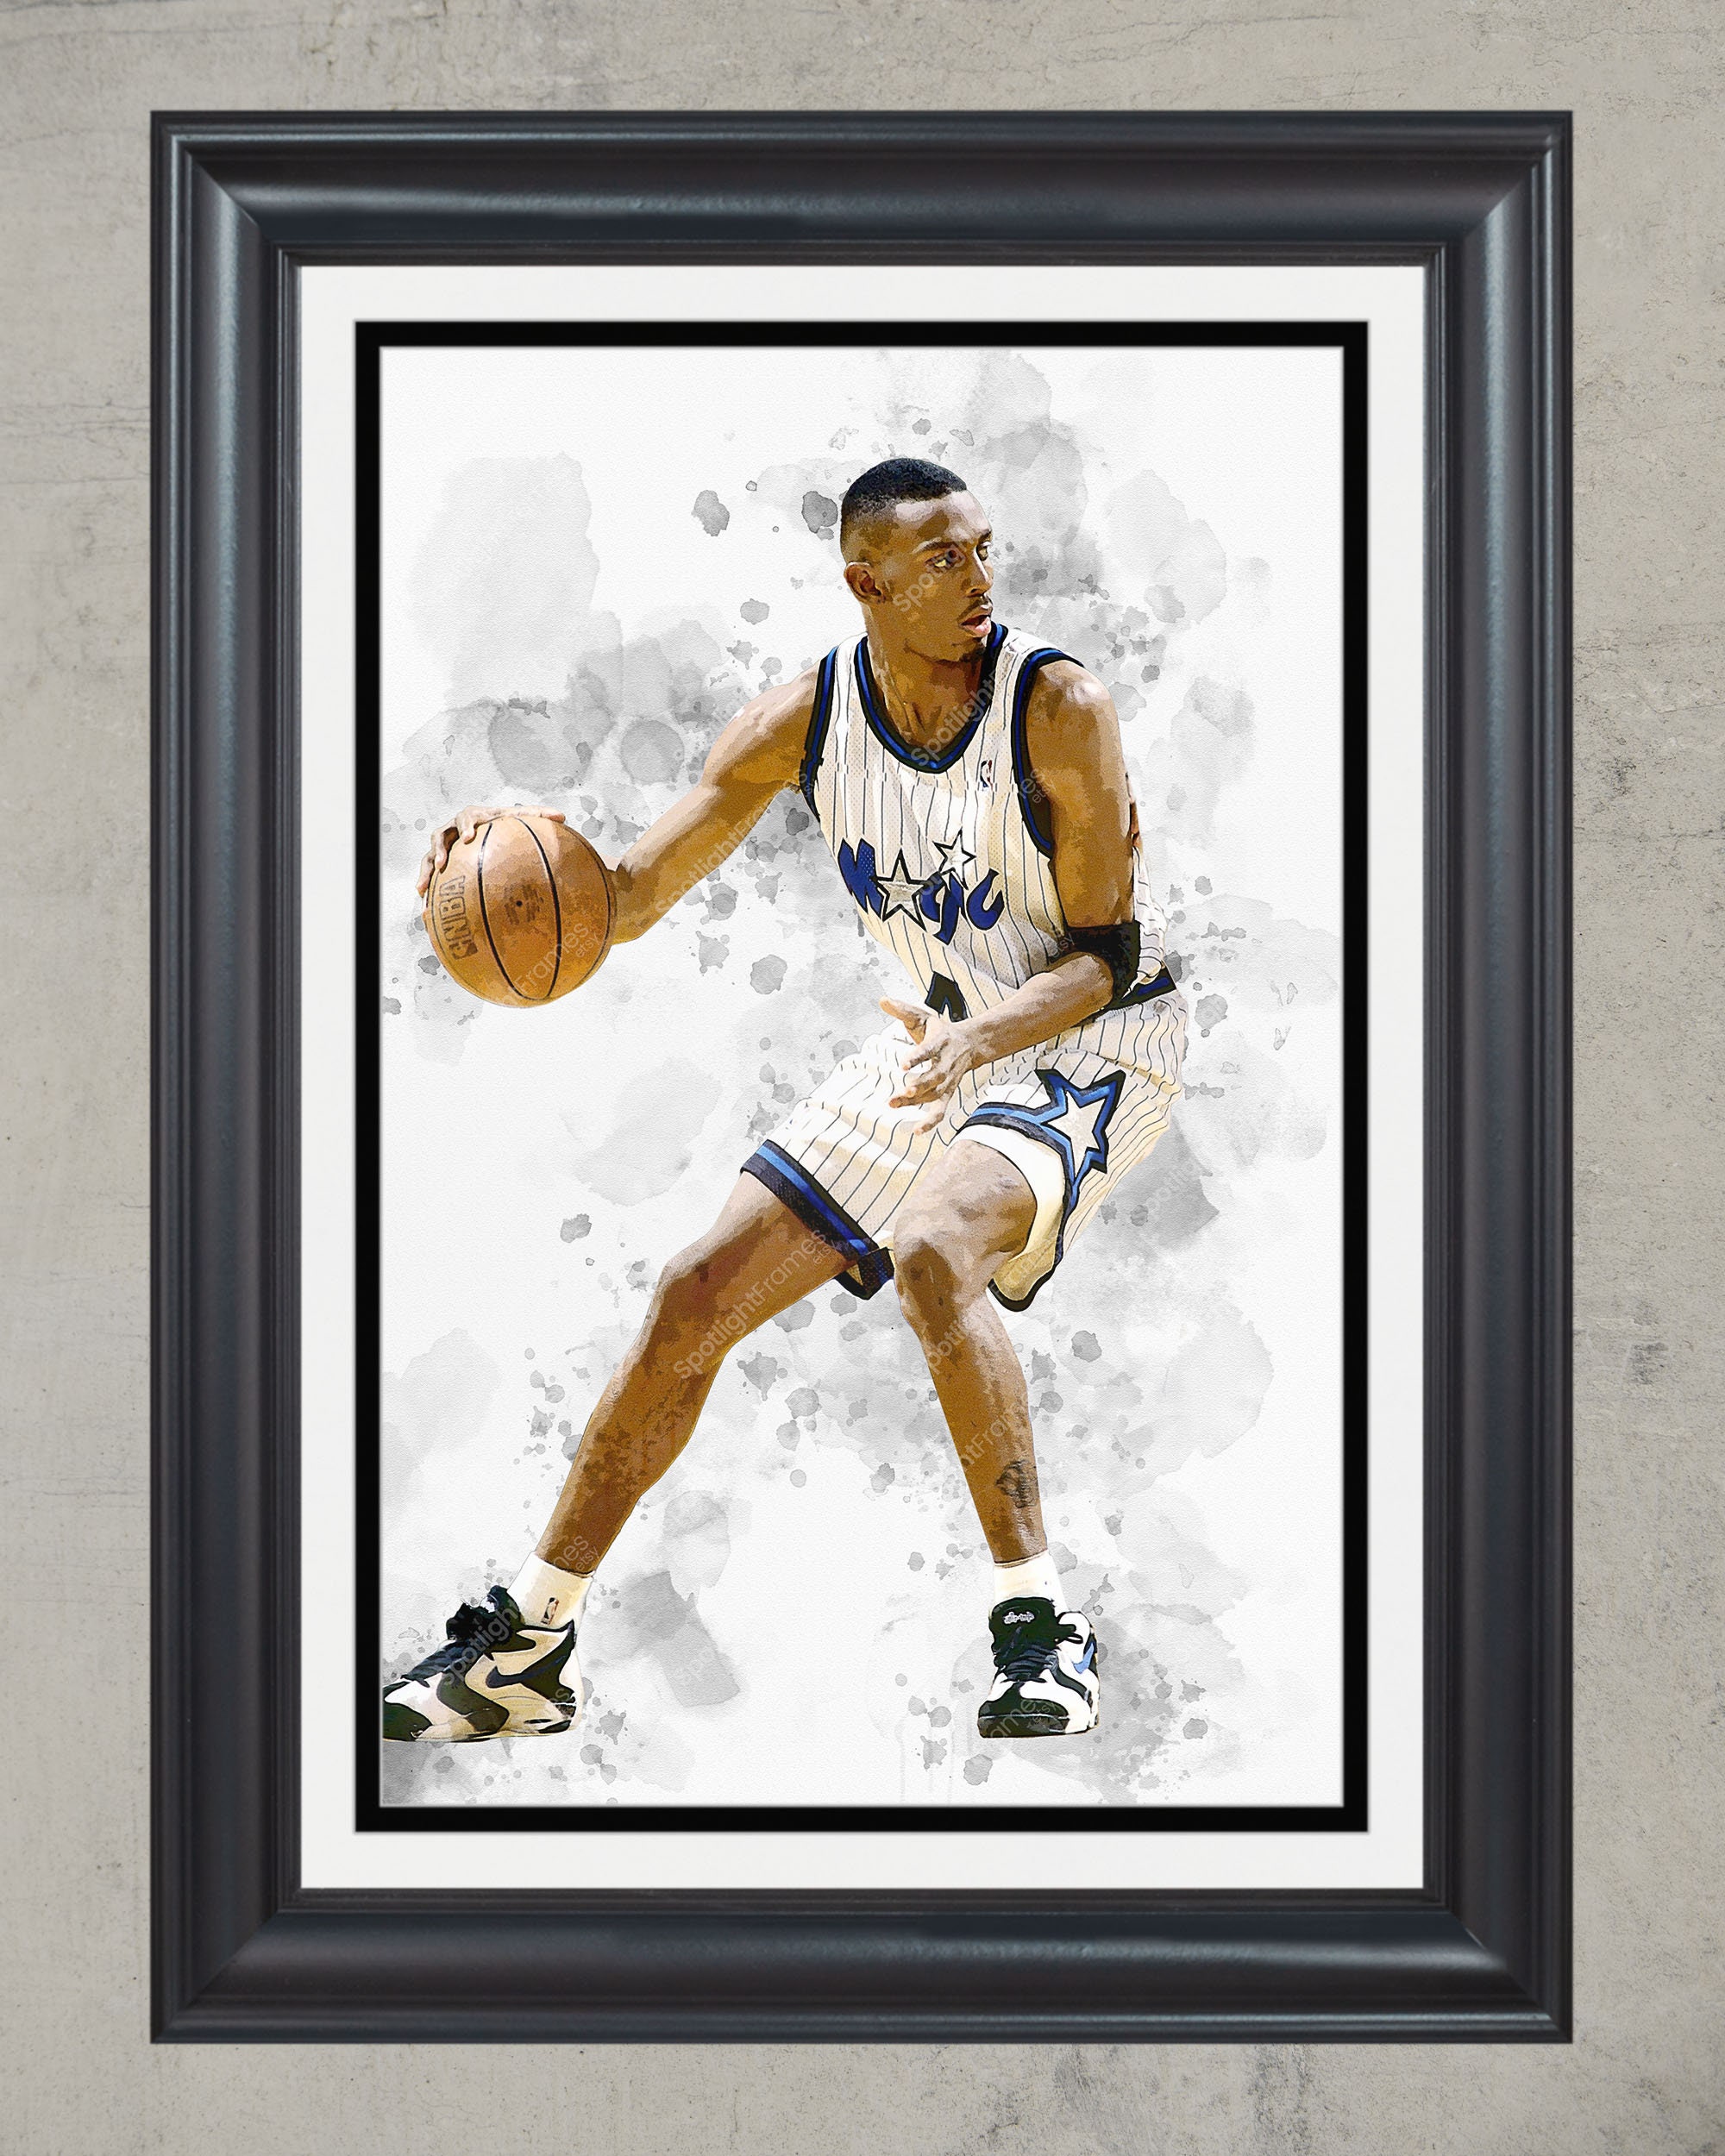 GSANEI Penny Hardaway Magic Dunk Poster Artworks Picture Print Wall Art  Painting Canvas Gift Decor Homes Decorative 08x12inch(20x30cm)